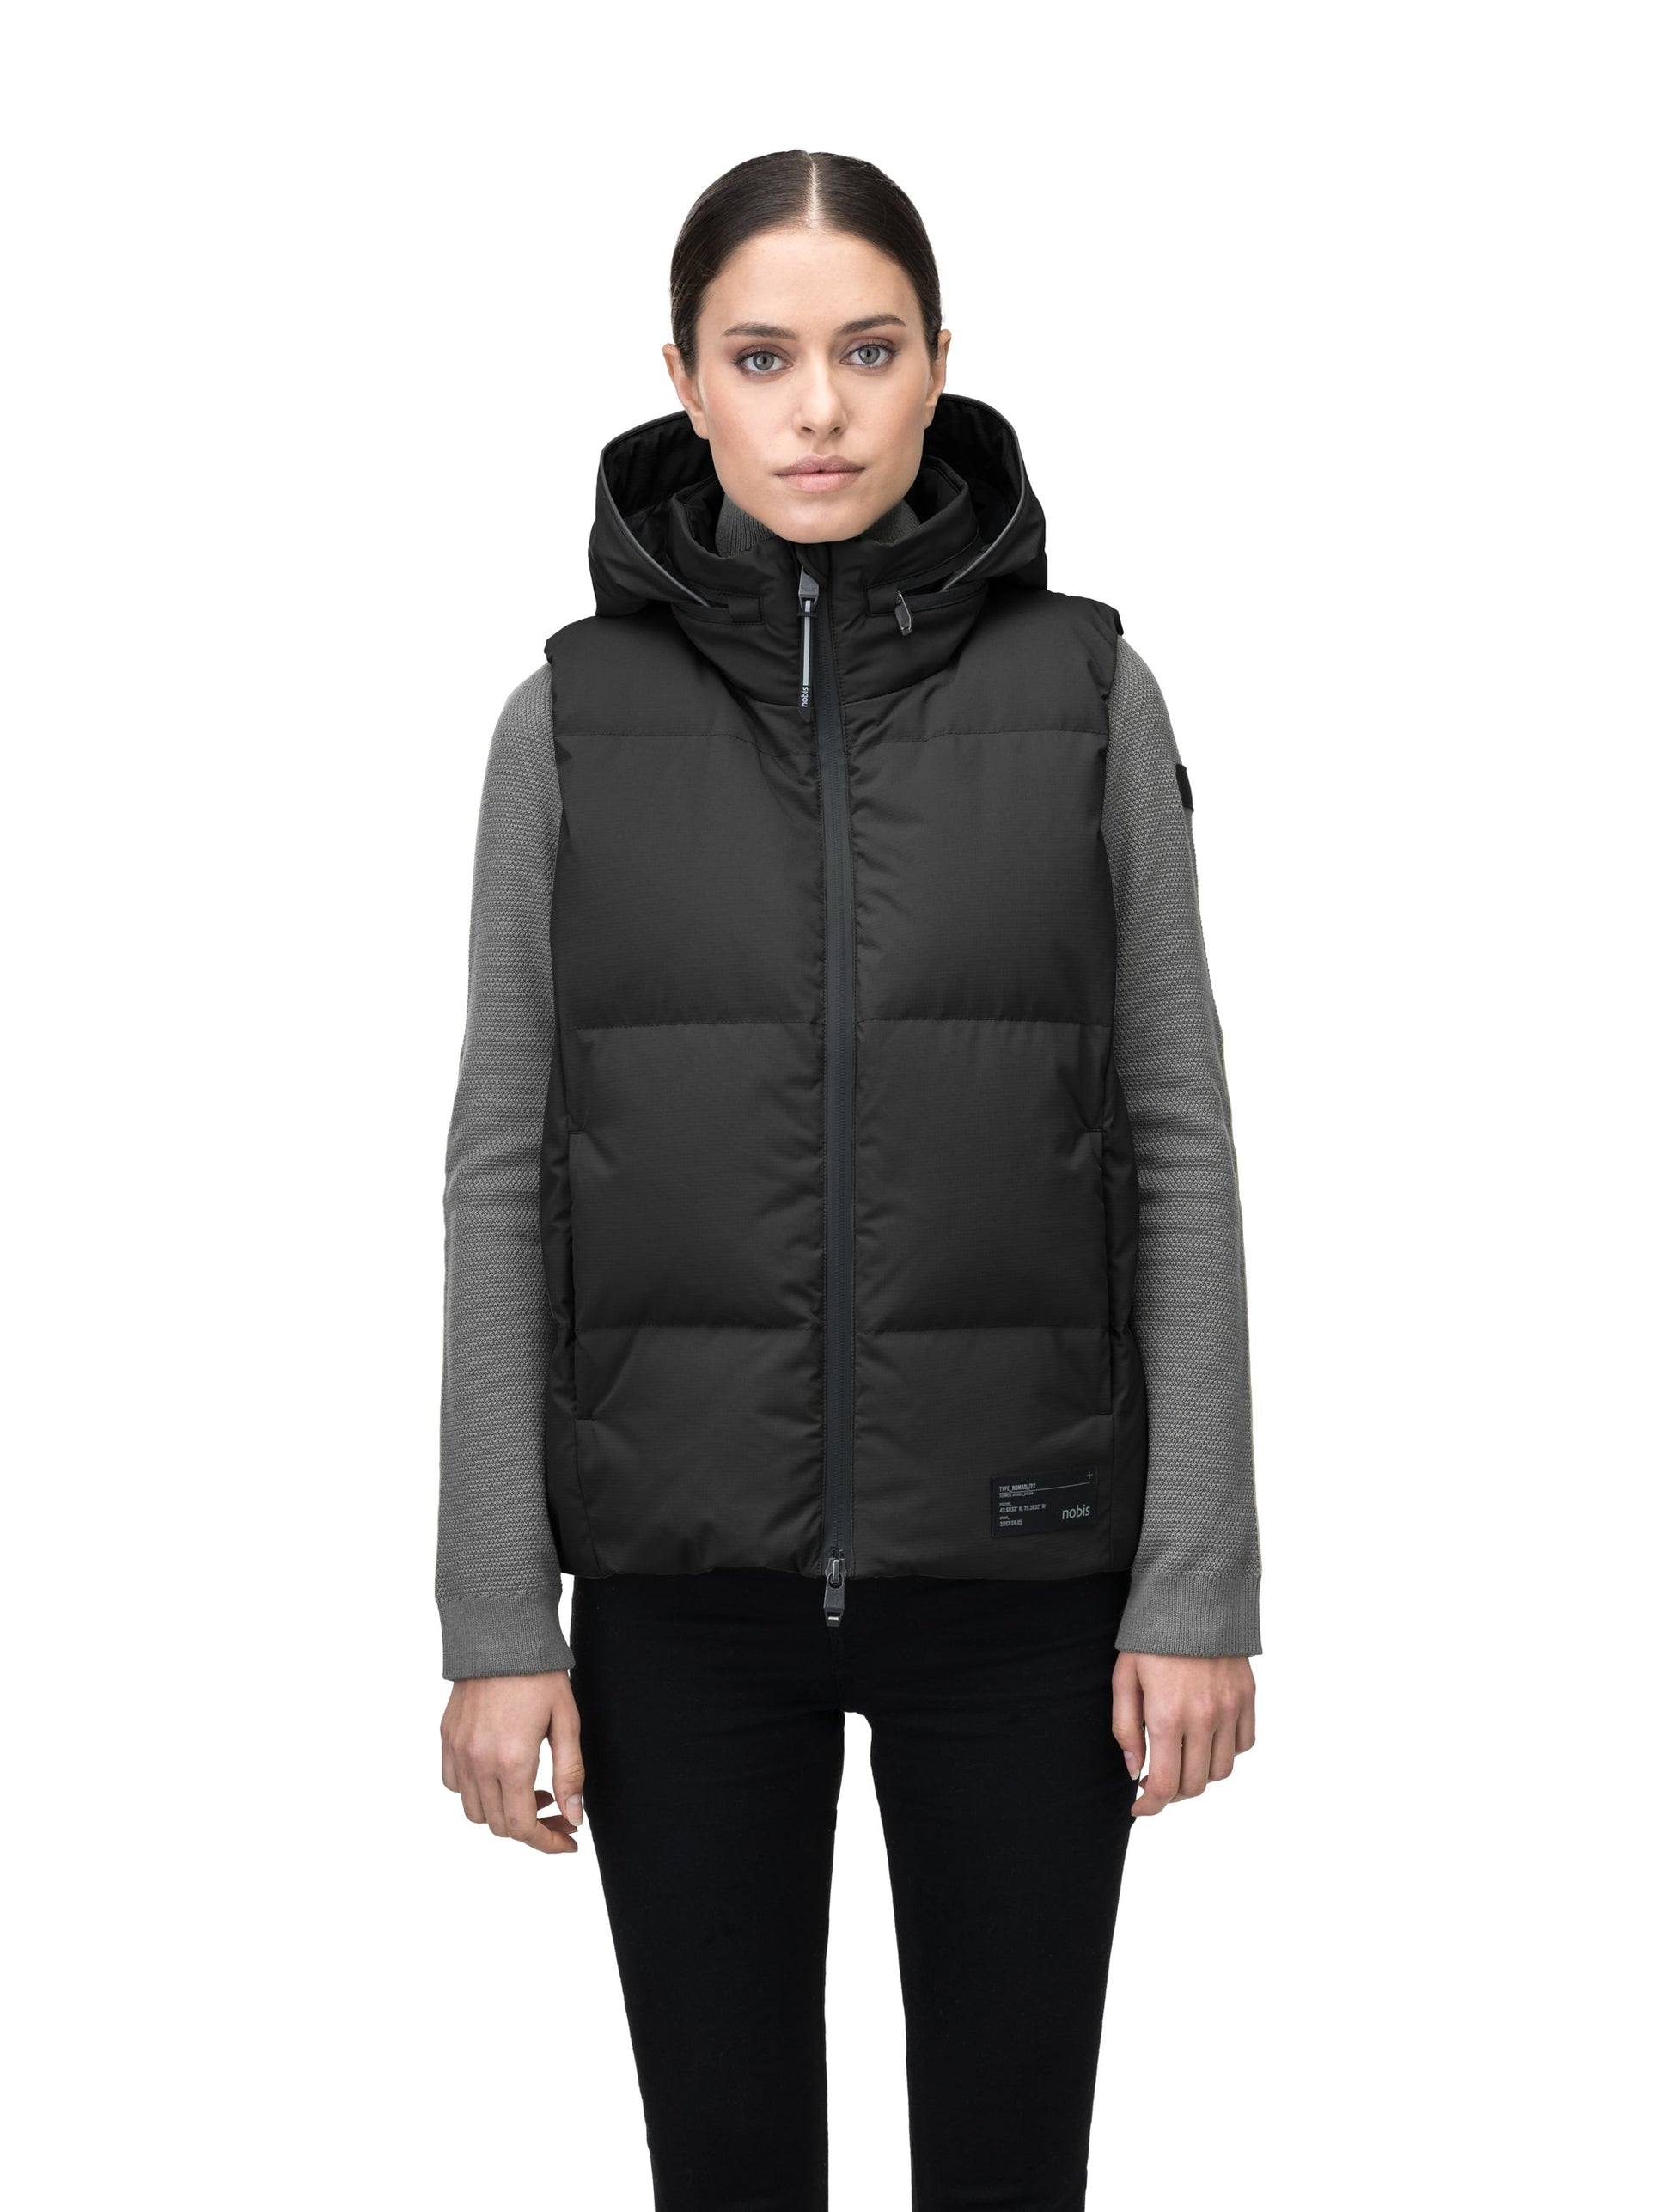 Oren Ladies Performance Vest in hip length, Durable Stretch Ripstop and 3-Ply Micro Denier fabrication, Premium Canadian White Duck Down insulation, tuck-away waterproof hood, and two-way centre front zipper, in Black